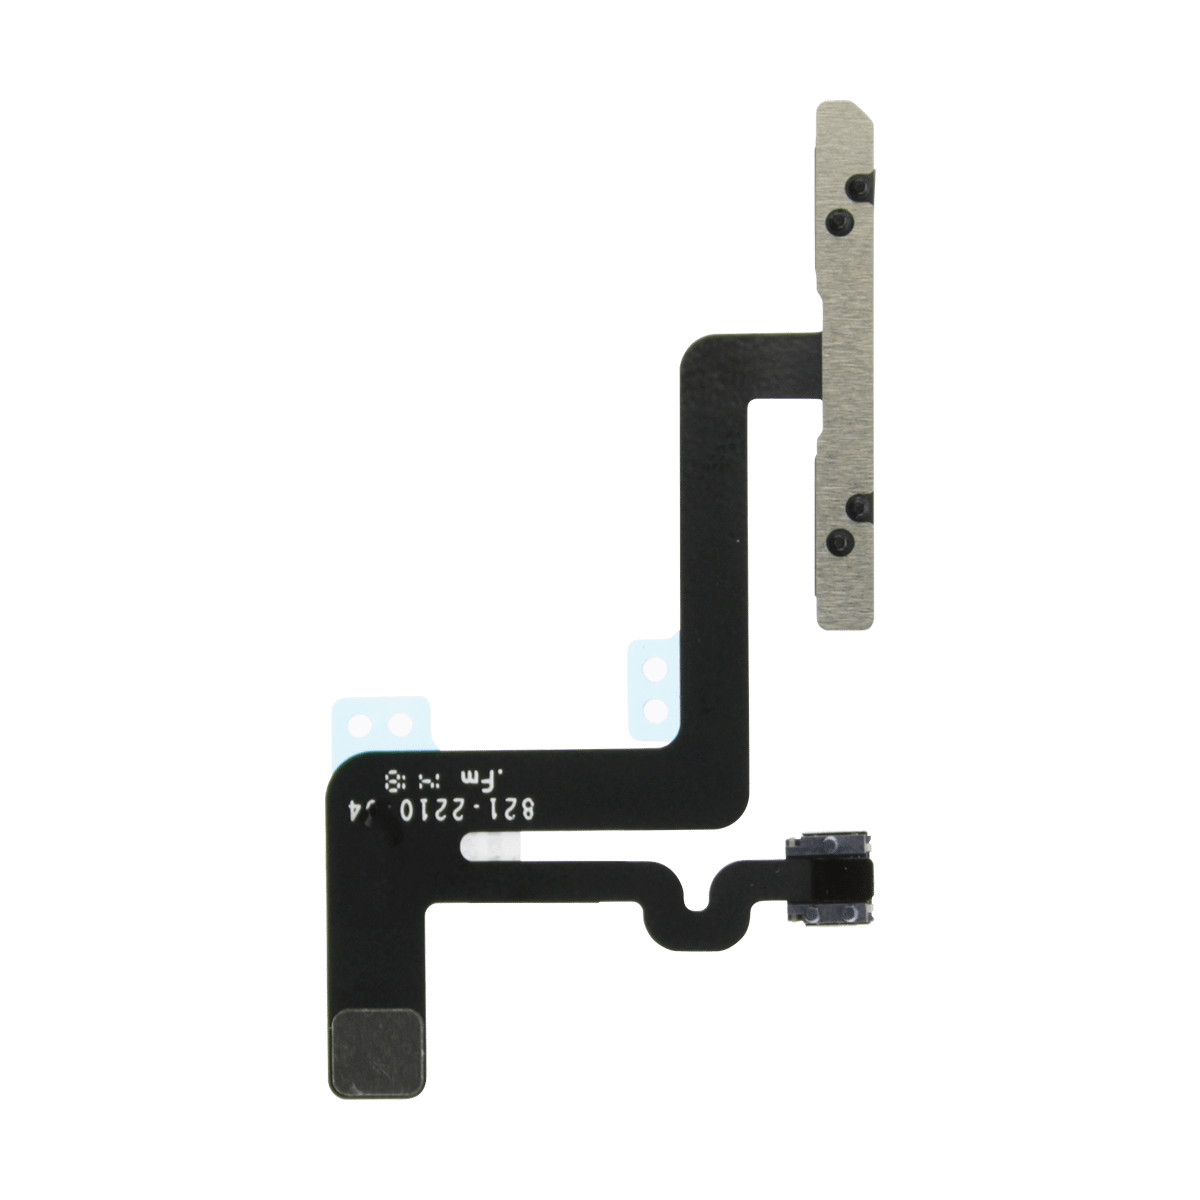 iPhone 6 Plus Volume Buttons Flex Cable Replacement